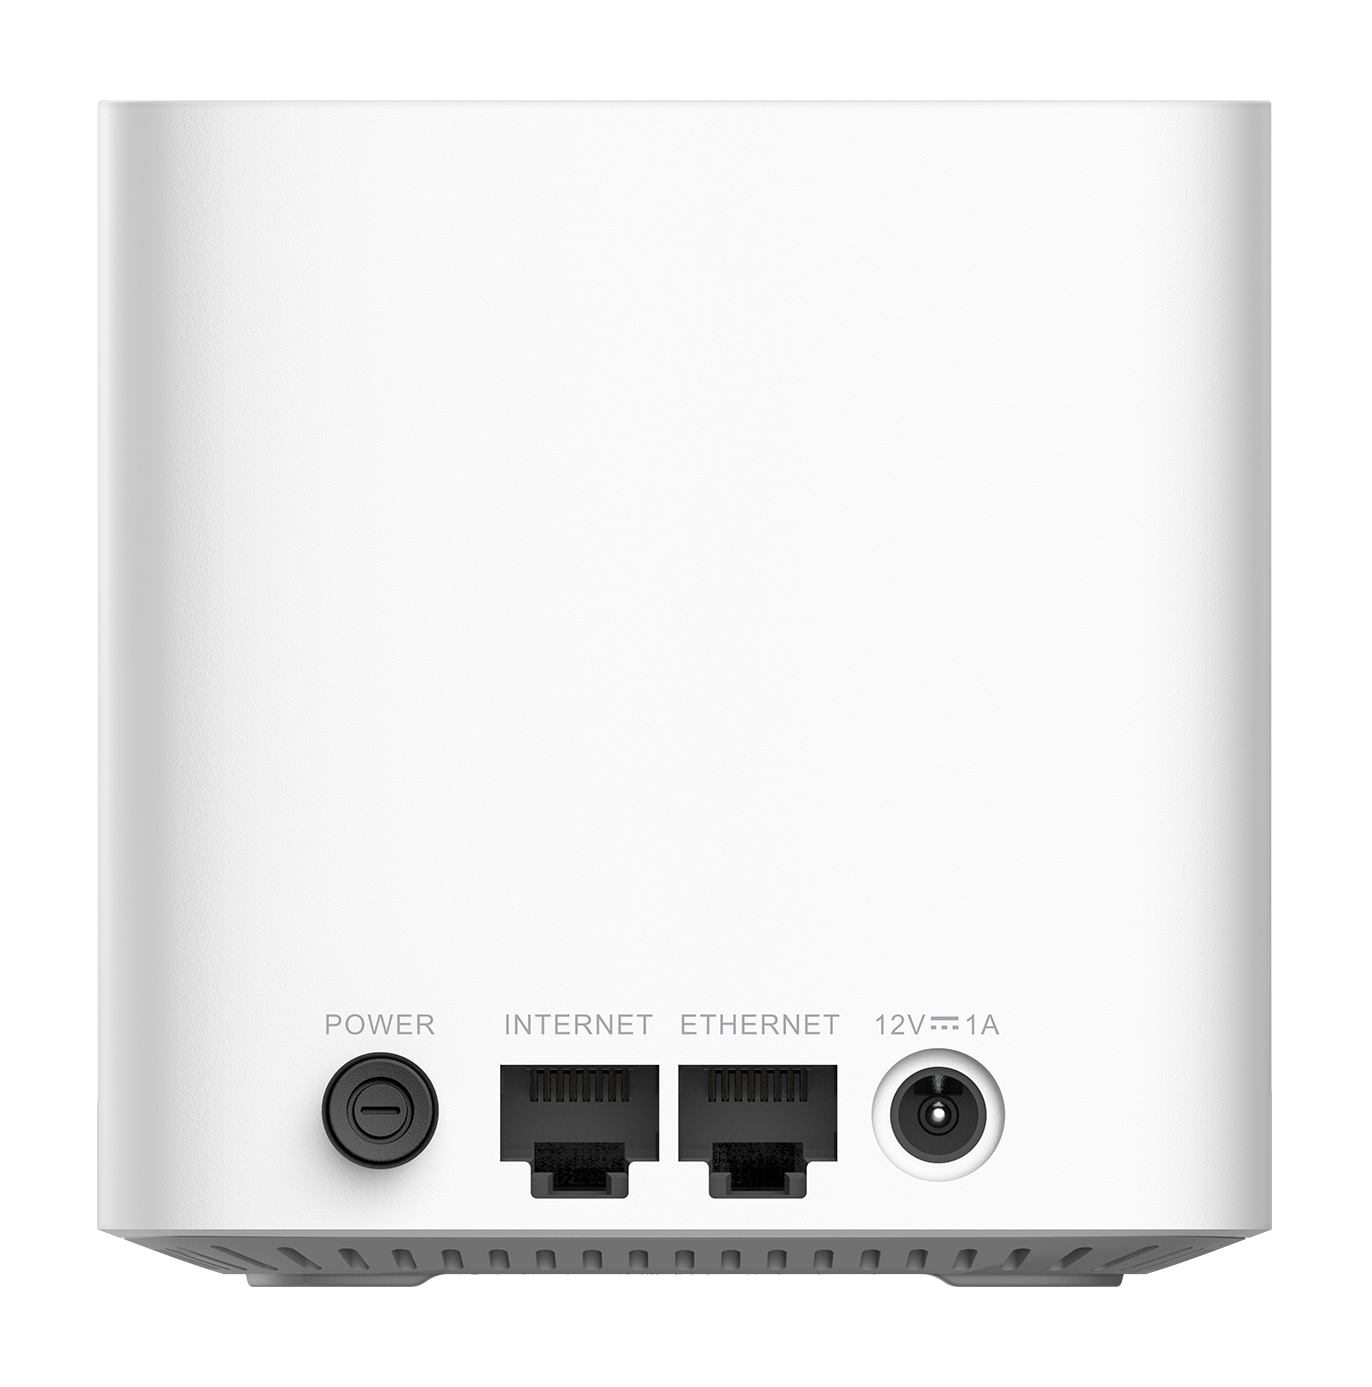 COVR-1100 AC1200 Dual Band Whole Home Mesh Wi-Fi System - back